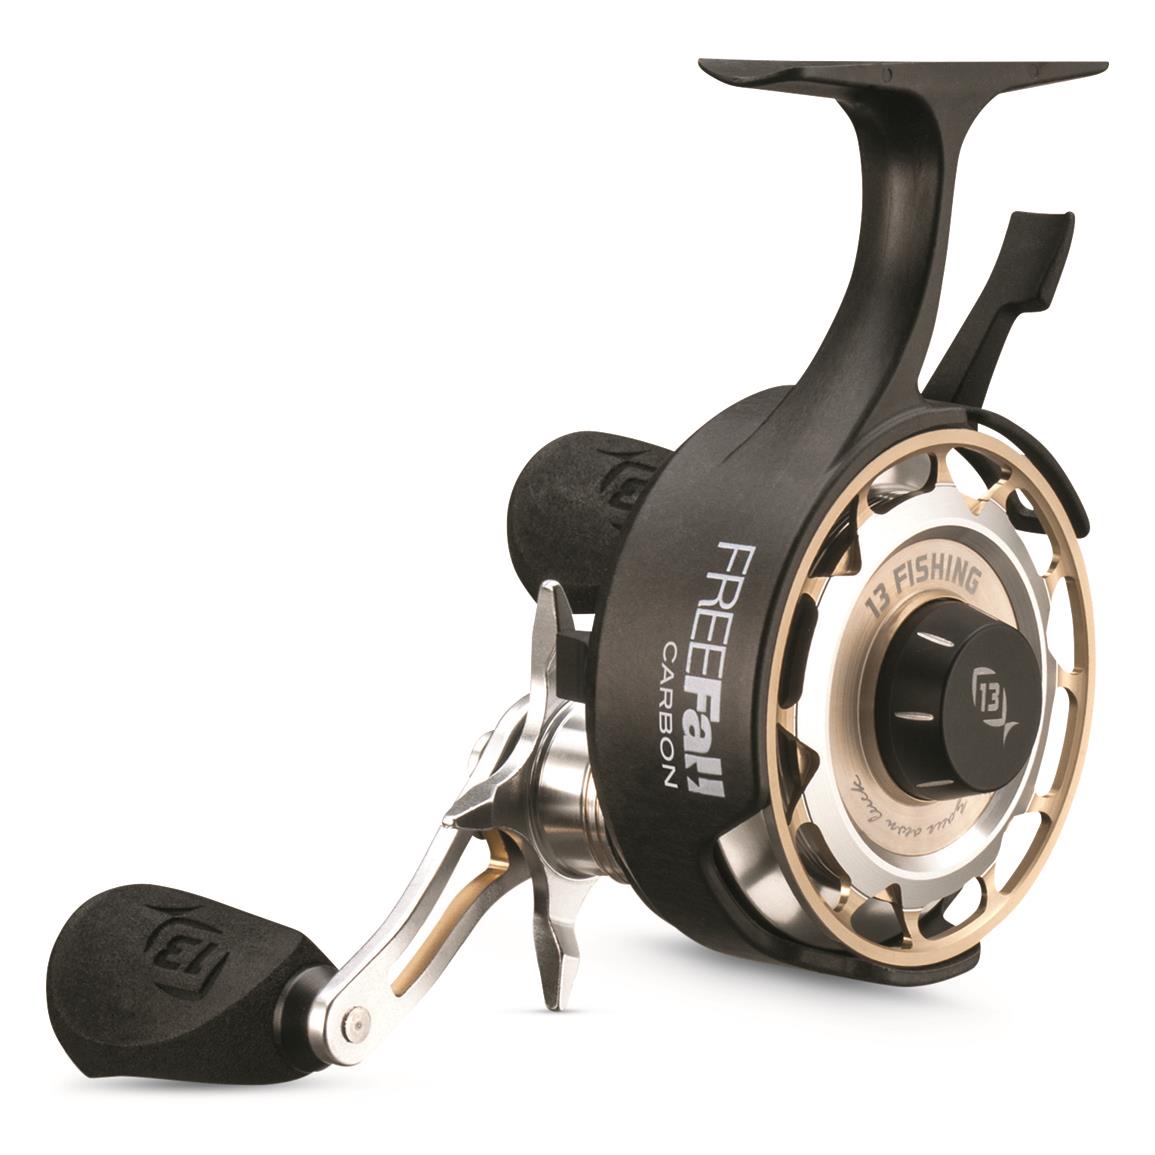 13 Fishing Wicked Long Stem Spinning Reel - 735078, Ice Fishing Reels at  Sportsman's Guide